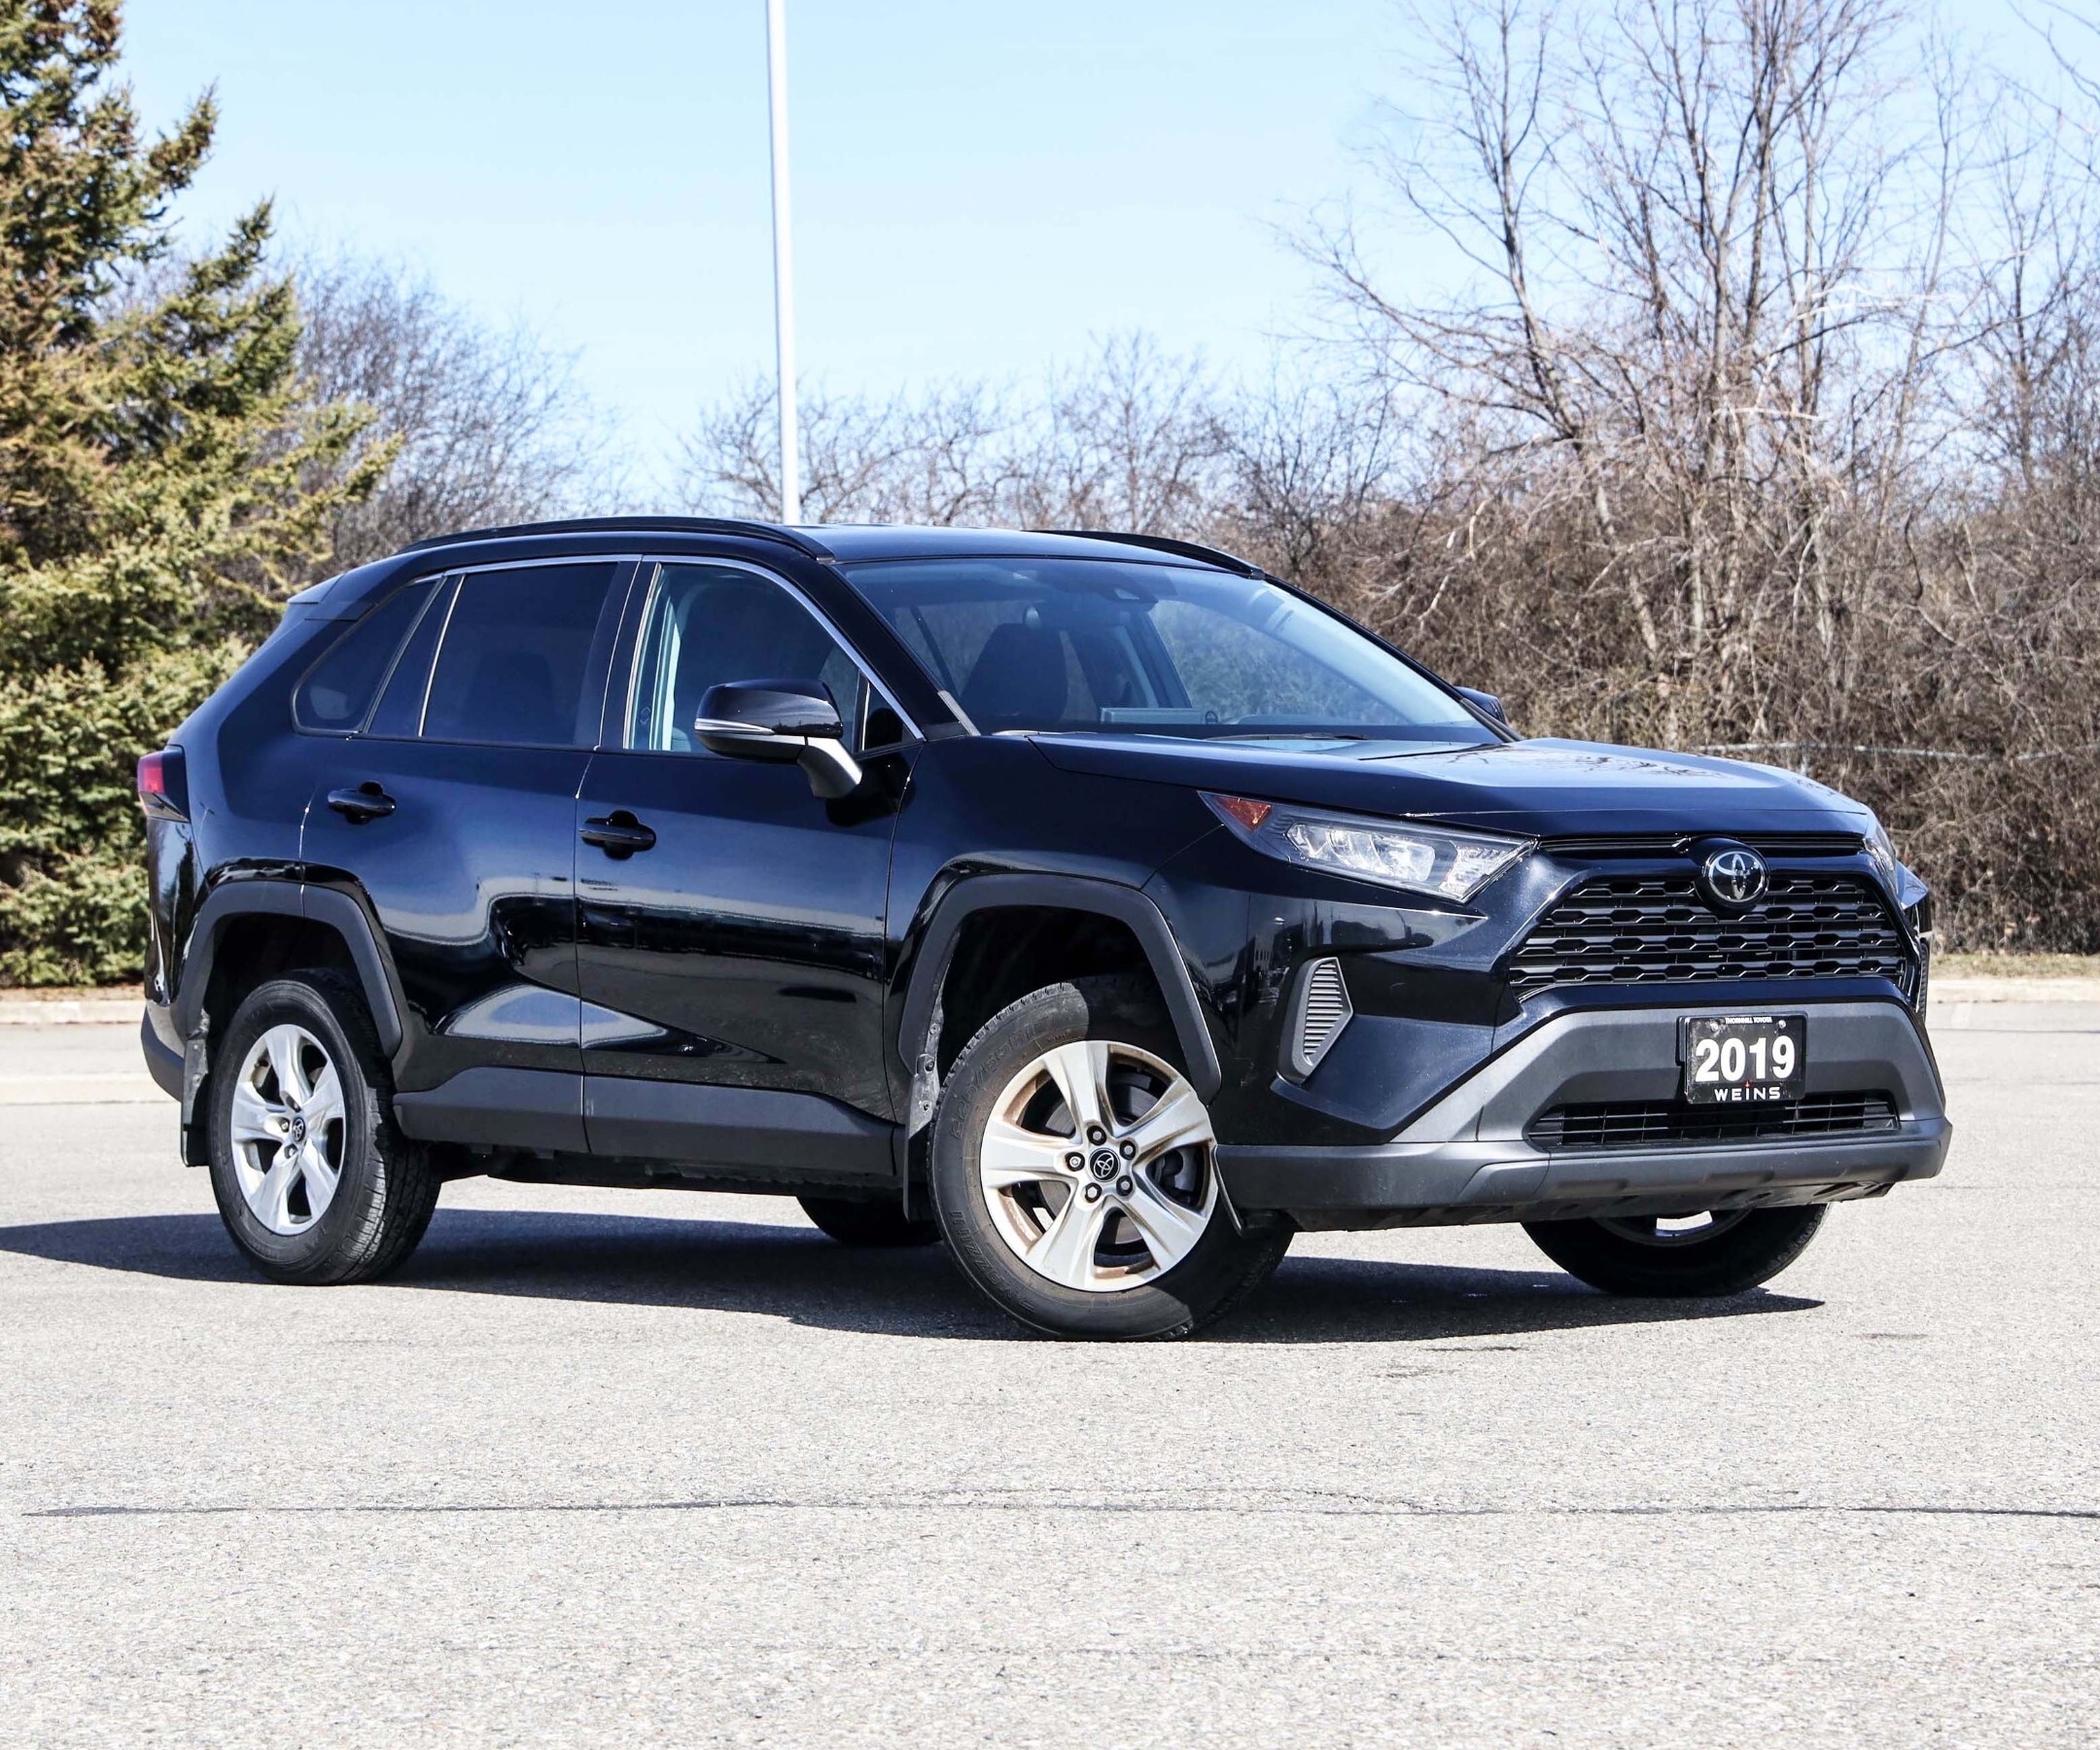 2019 Toyota RAV4 LE CLEAN CARFAX | HEATED FRONT SEATS